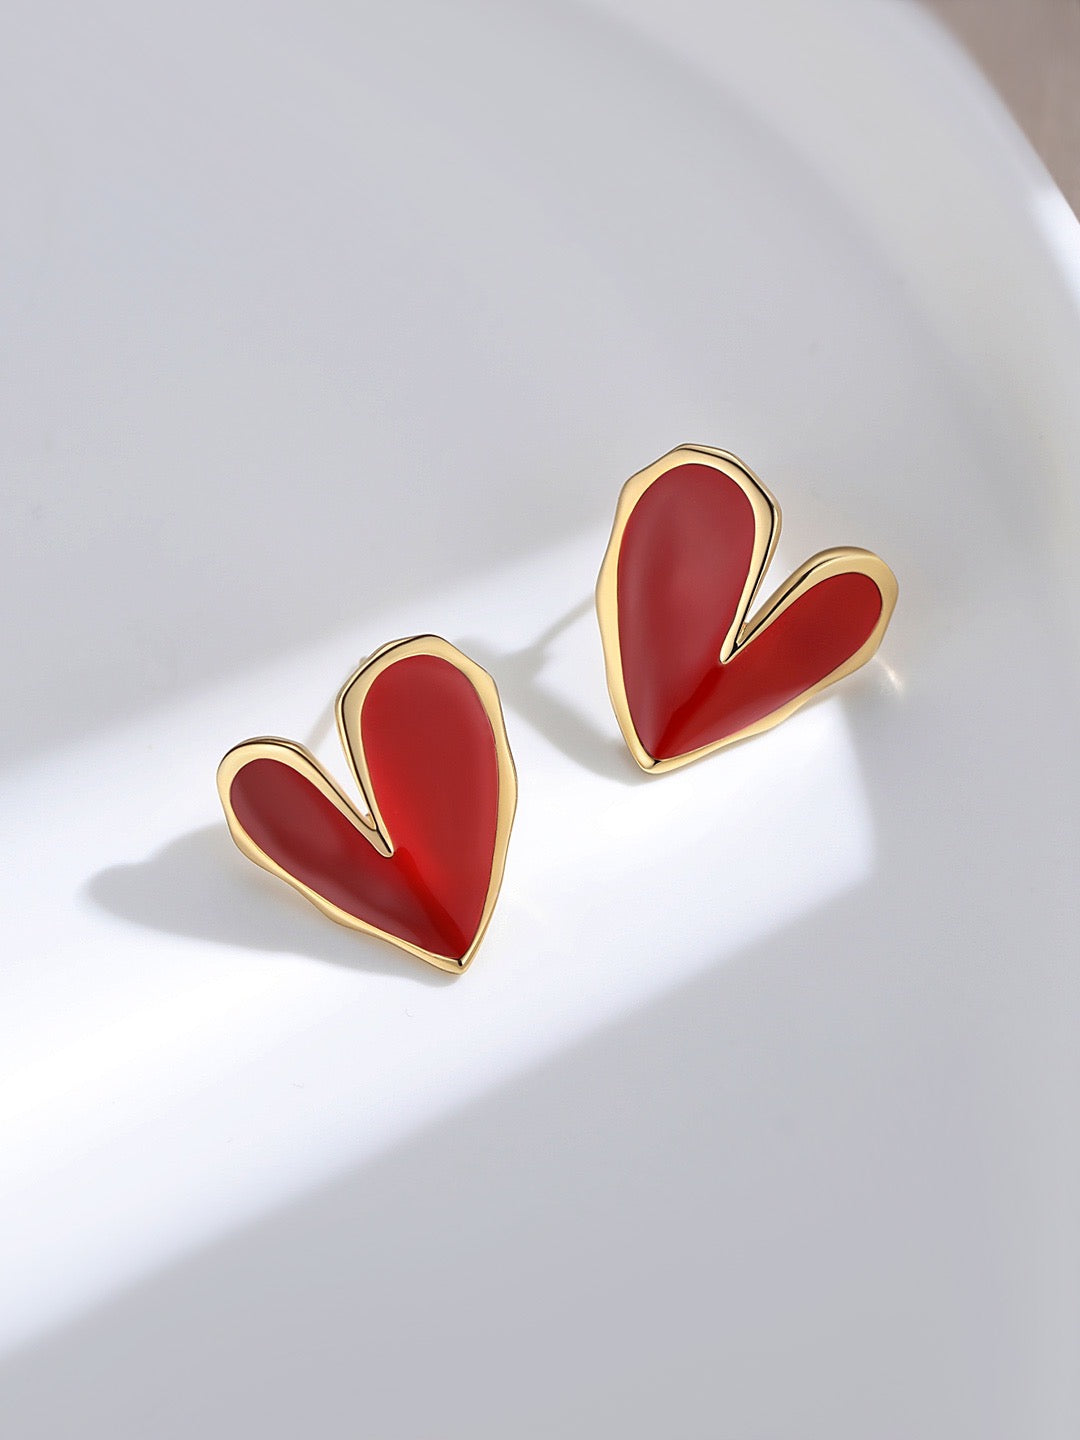 Large Red Heart Earrings | Red jewelry | Red earrings | Gold jewelry | Silver jewelry | Women's earrings